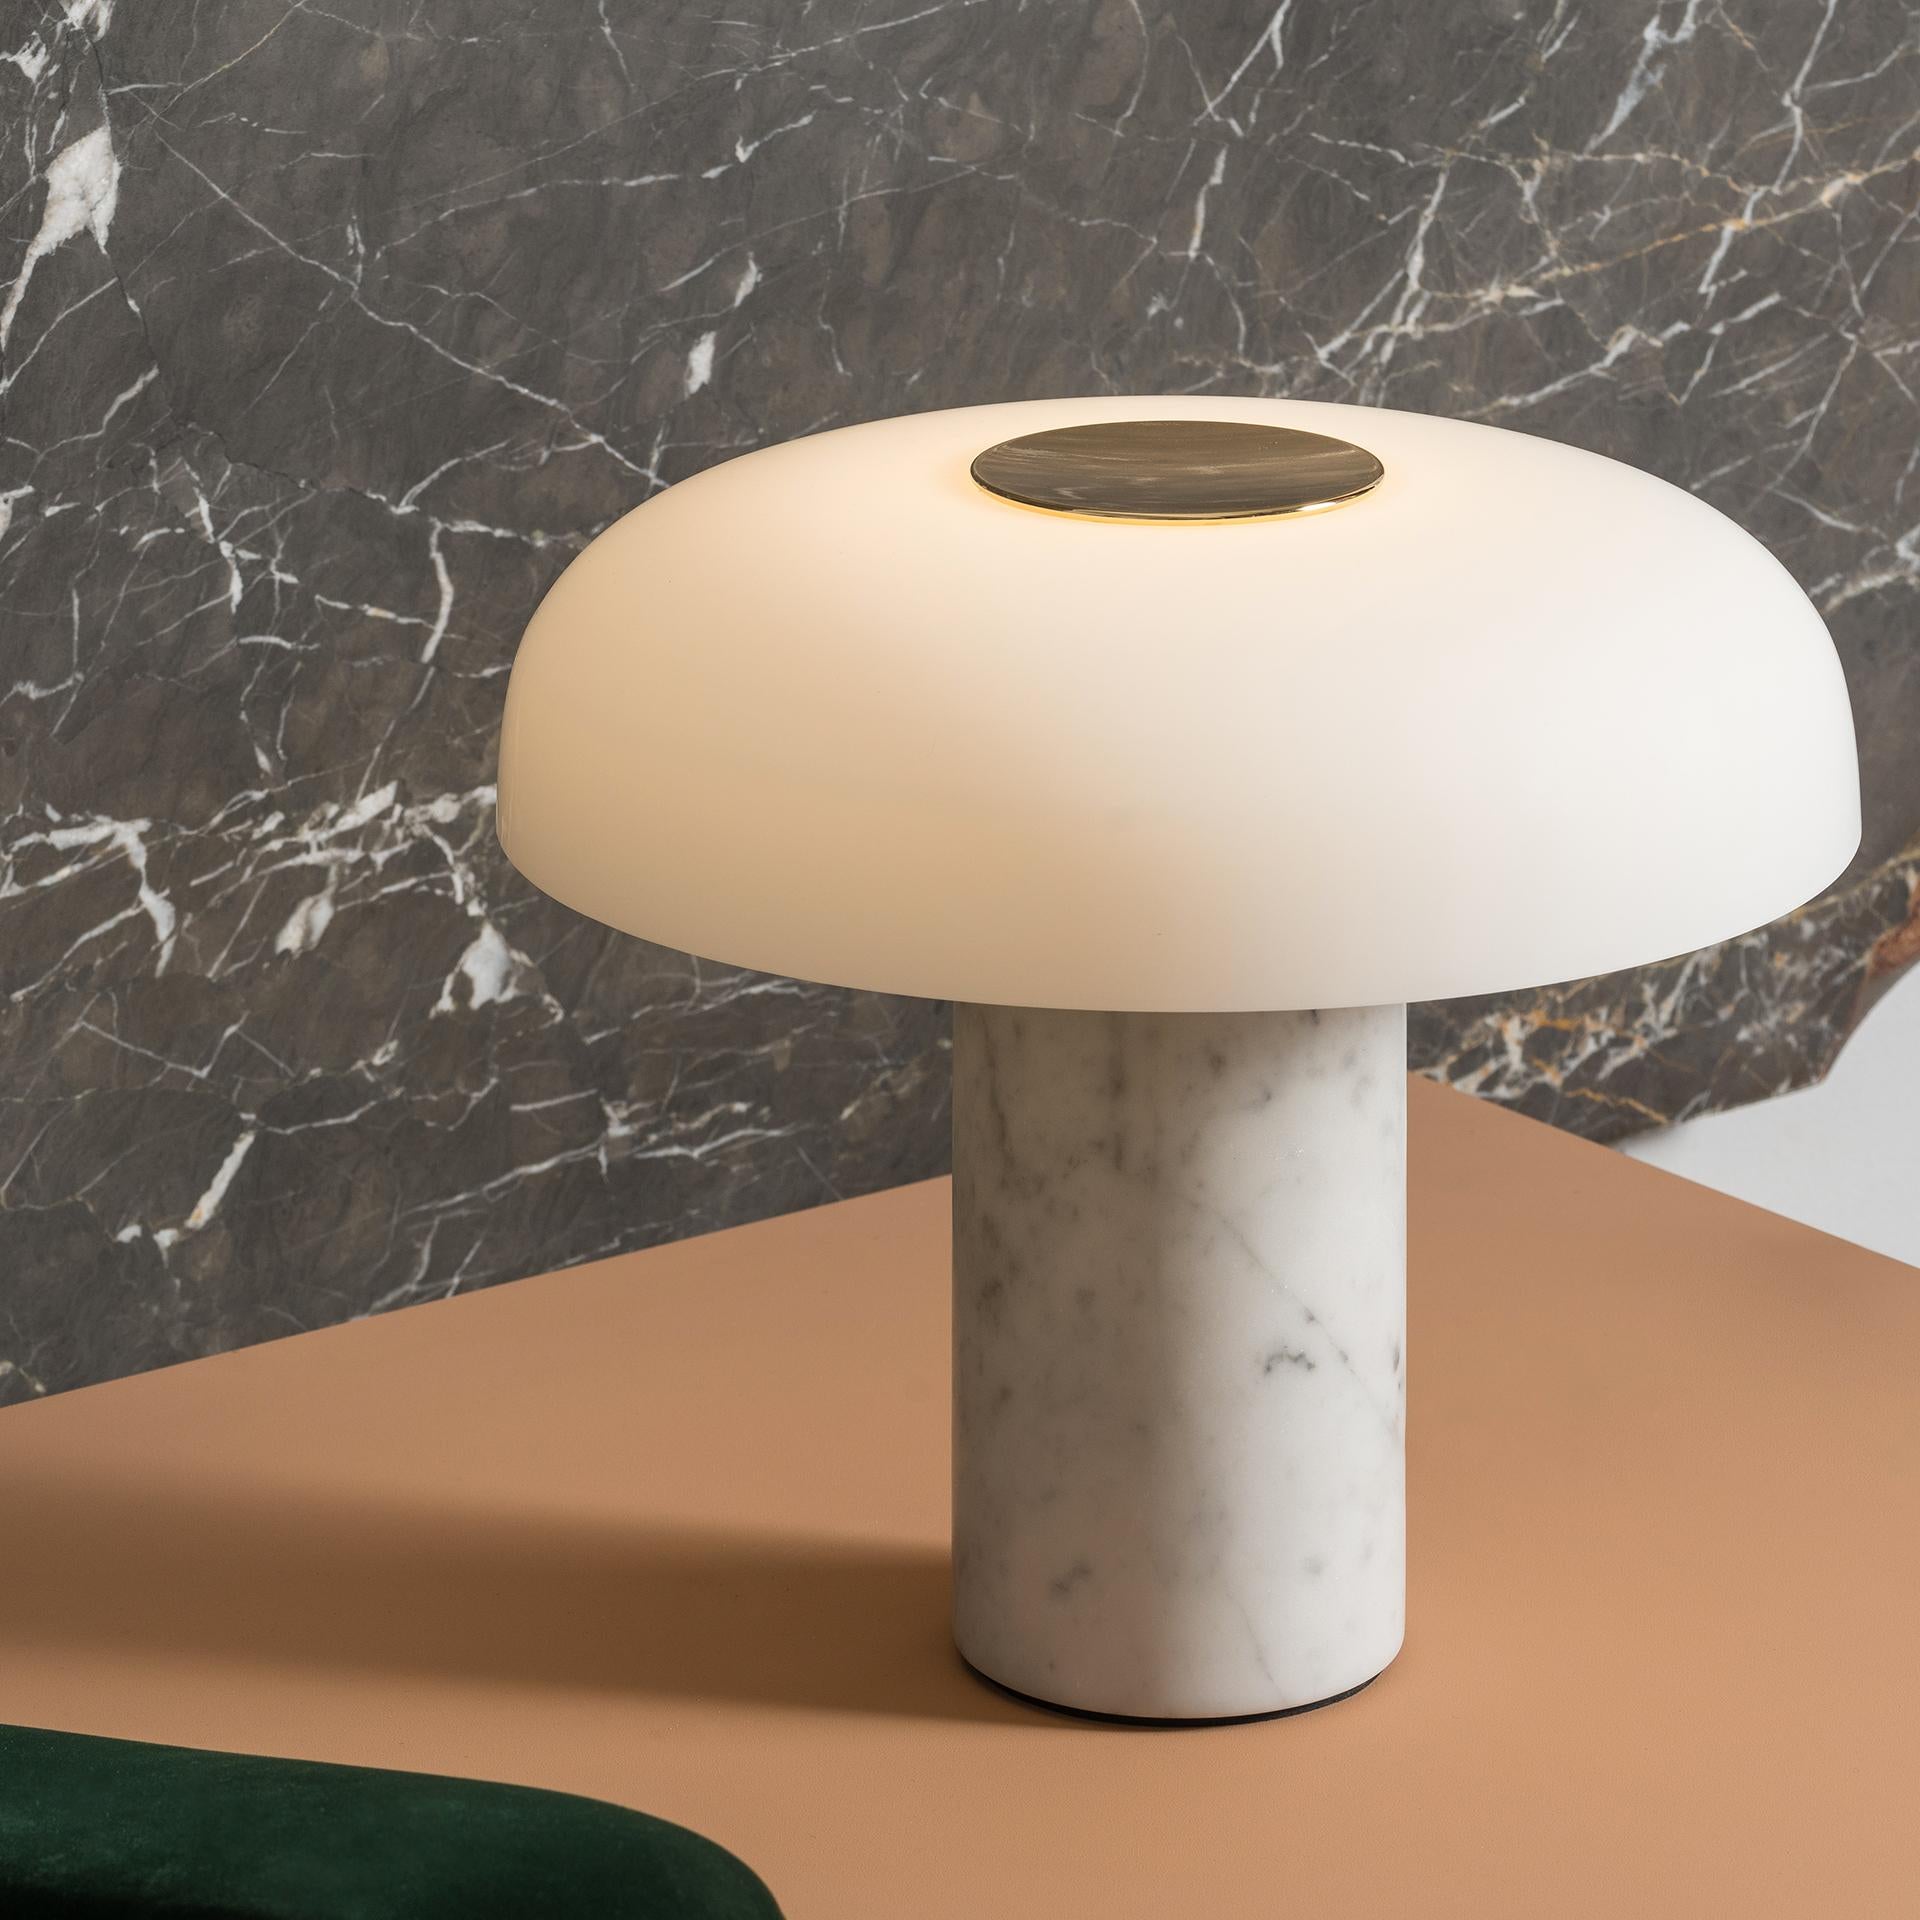 Large Fontana Arte 'Tropico' white marble & glass table lamp by Studio Buratti.

Executed in high quality marble, thick etched hand blown opaline glass and galvanized gold colored metal. The 